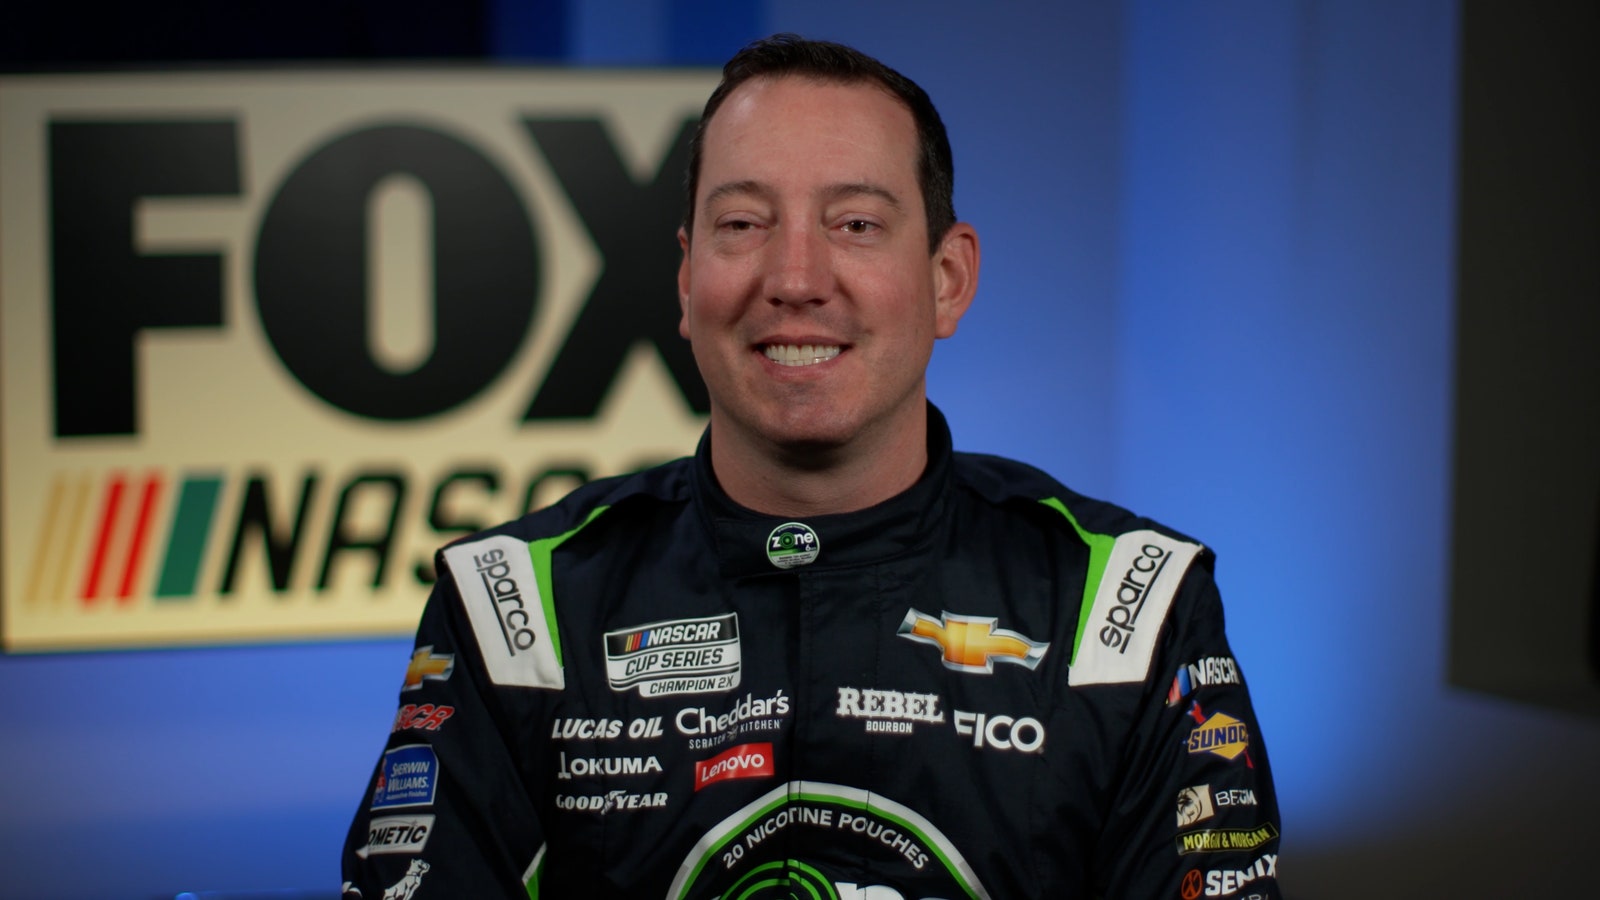 Kyle Busch on what’s been different this offseason after selling his KBM truck team